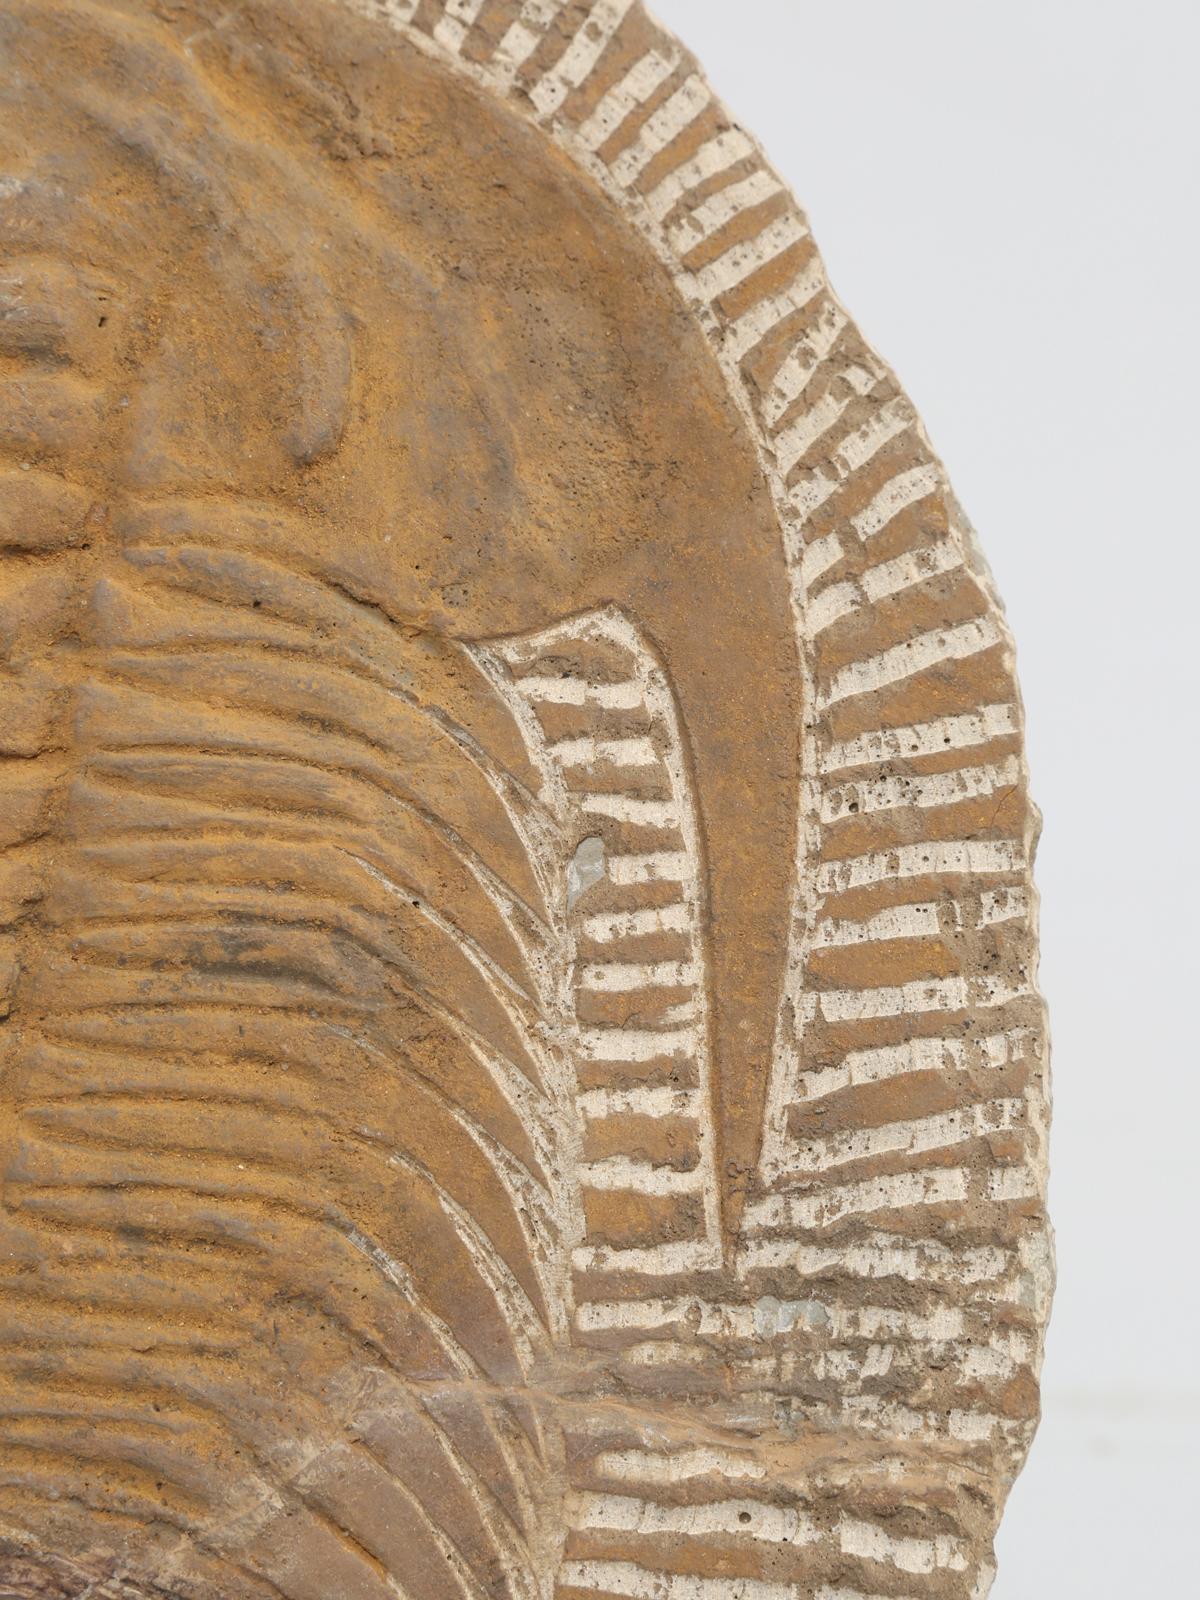 18th Century and Earlier Fossil of Cambropallas Trilobite from Paleozoic Era of the Cambrian Period